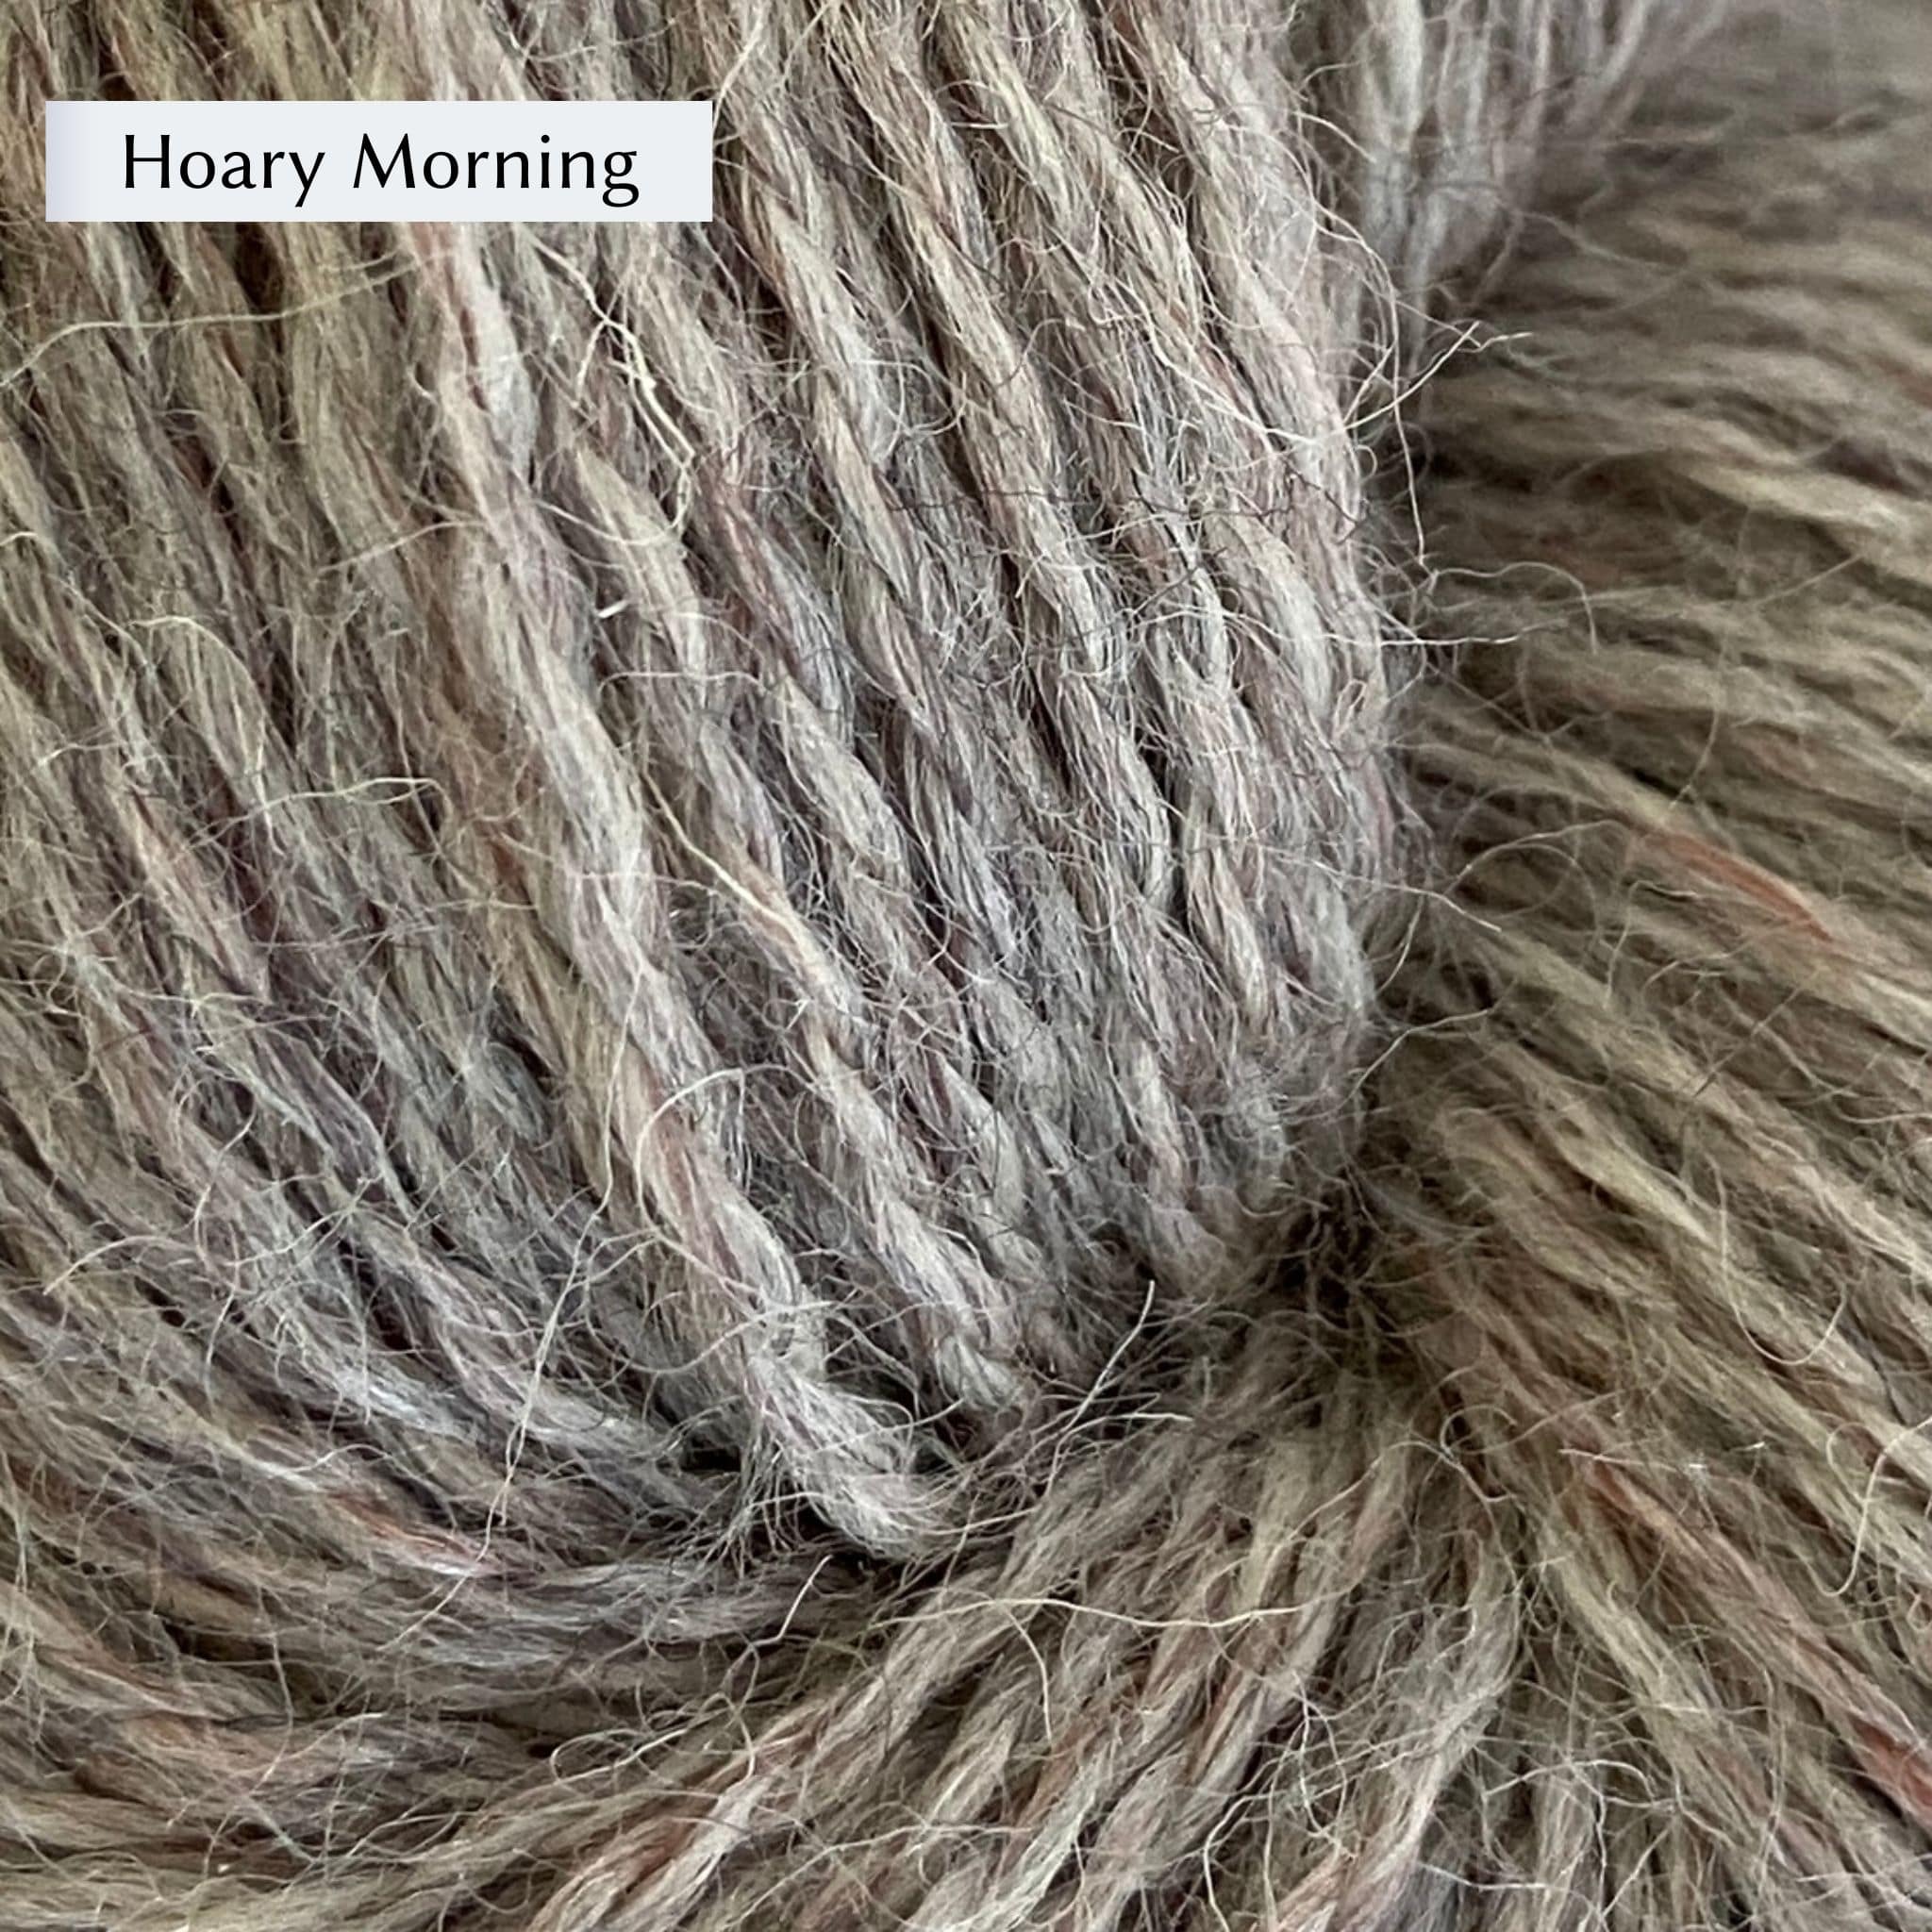 John Arbon Appledore DK, a DK weight British yarn, in color Hoary Morning, a heathered light grey